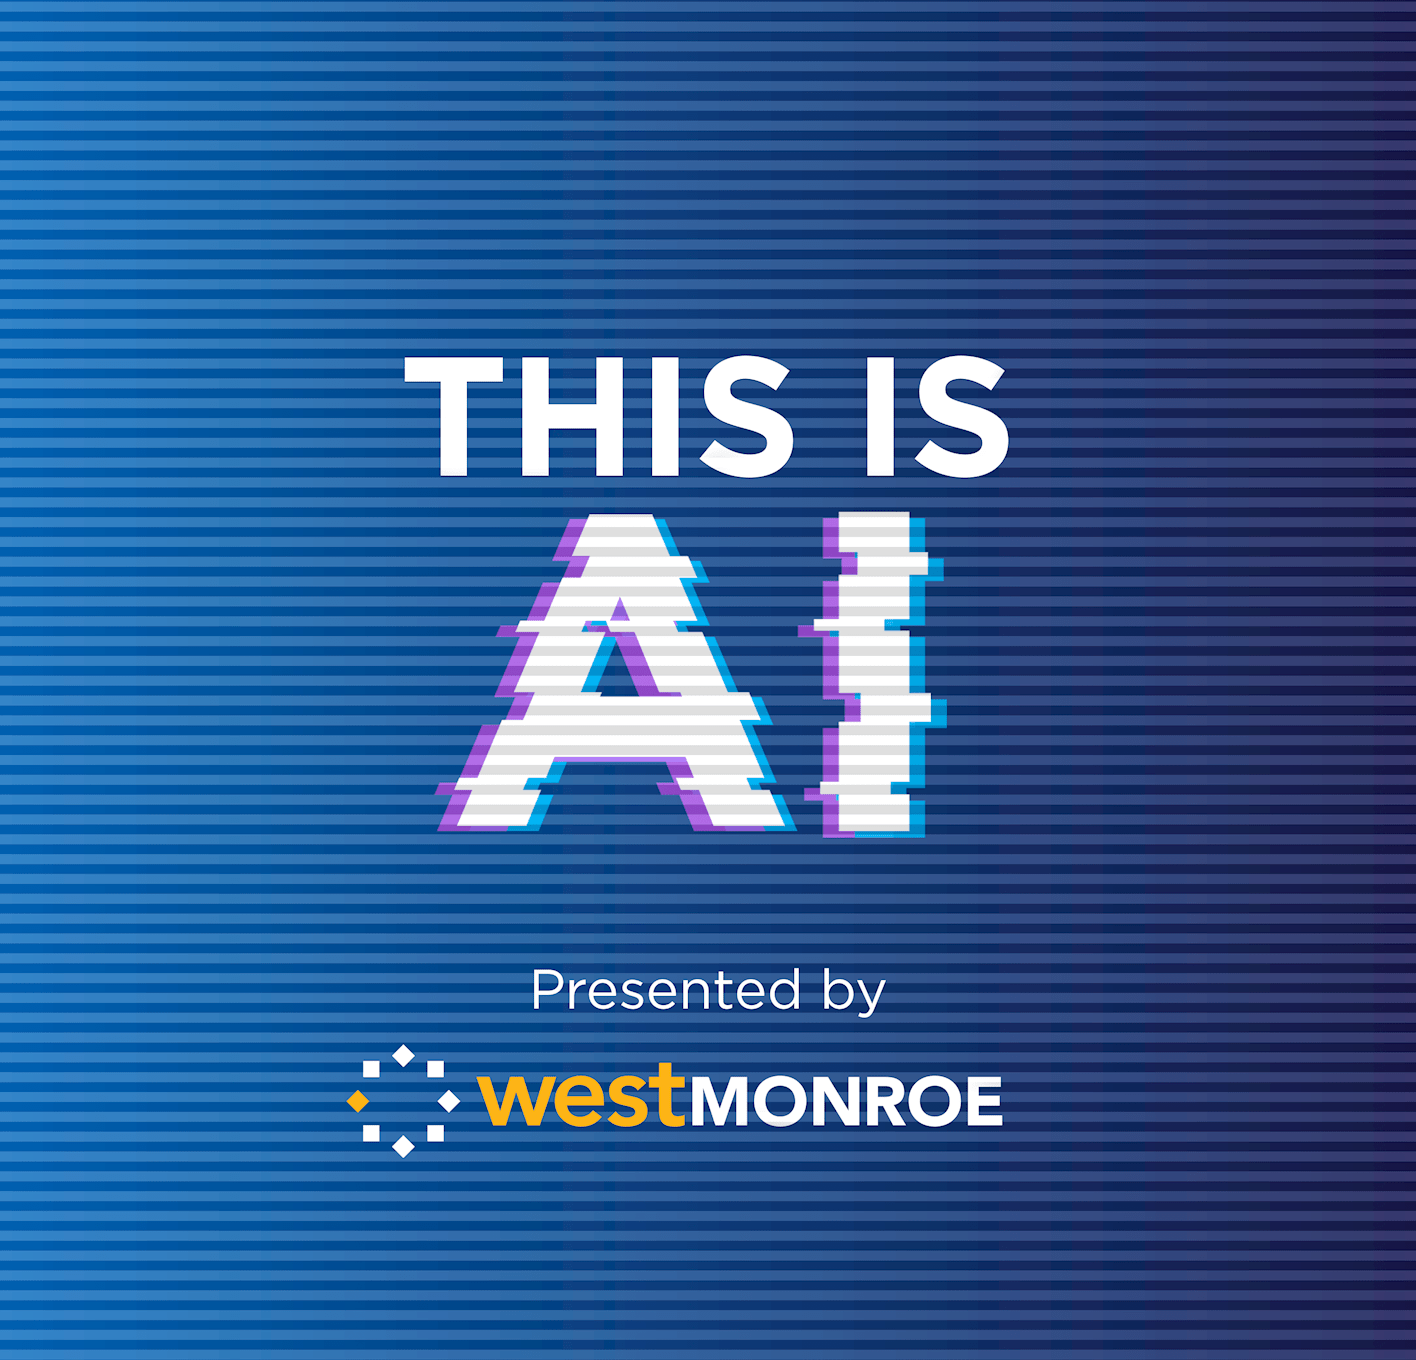 Our new podcast miniseries features real-world examples and use cases to revolutionize your business and the way you see AI. Listen now!